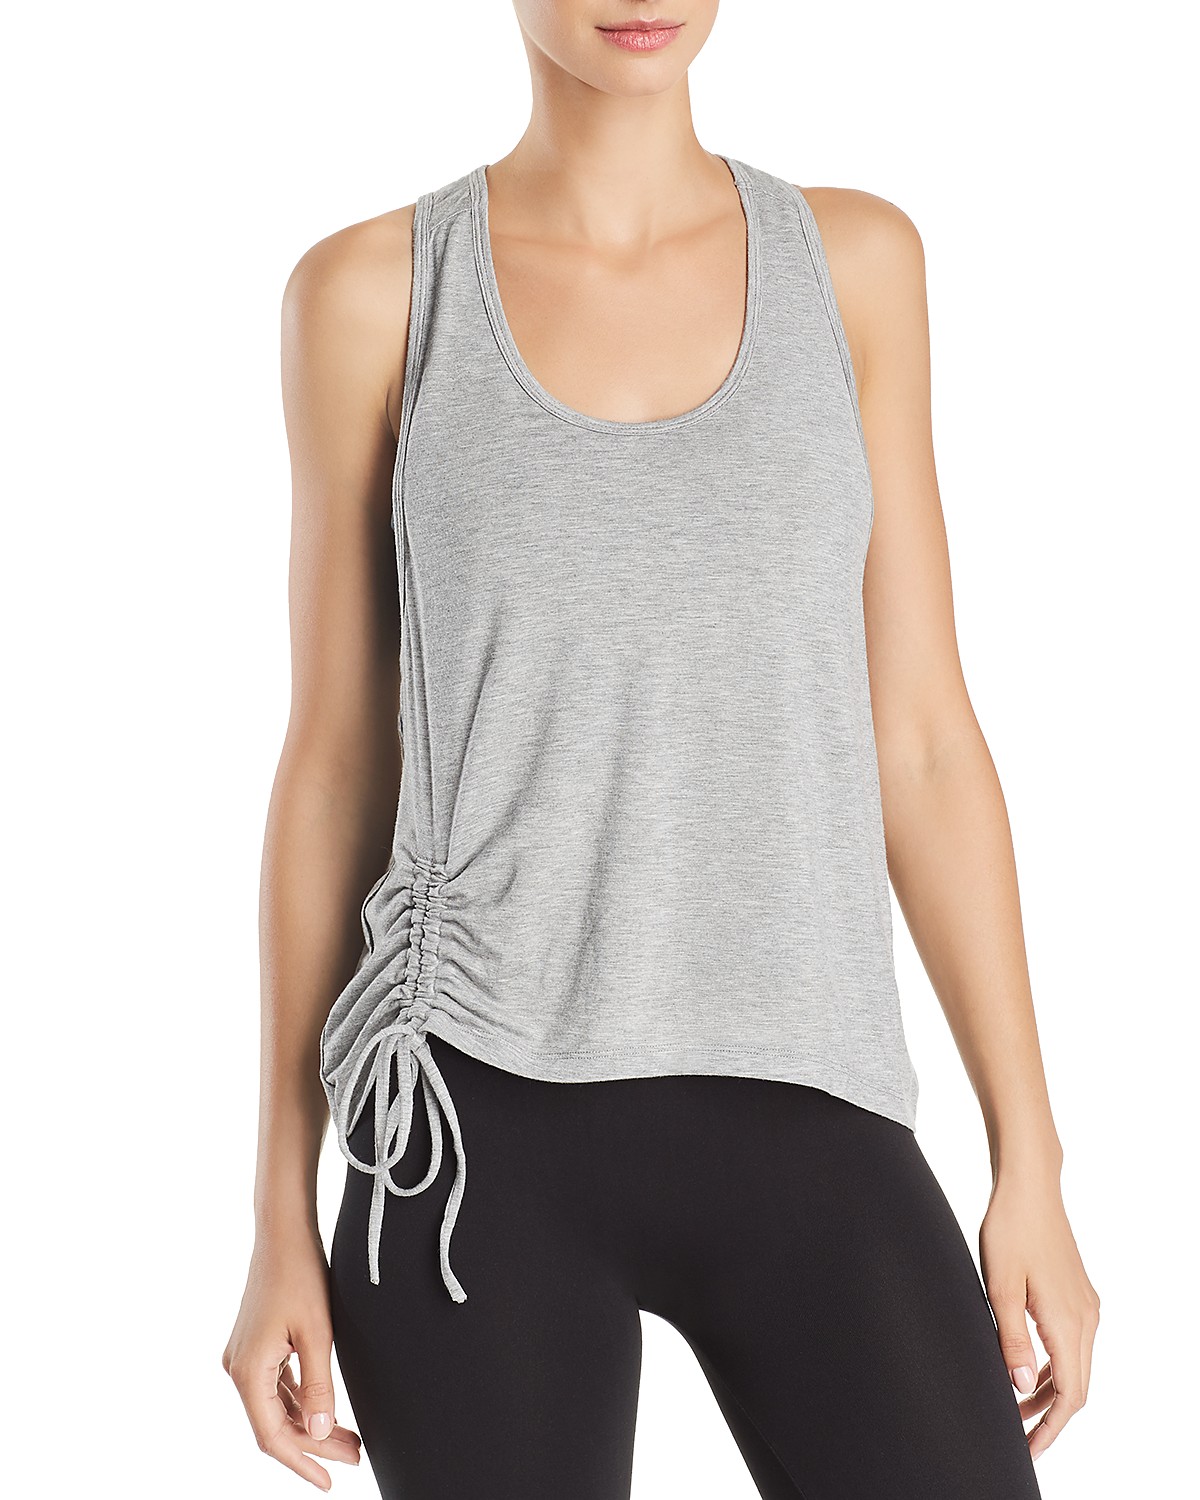 www.couturepoint.com-aqua-athletic-womens-grey-ruched-drawstring-racerback-tank